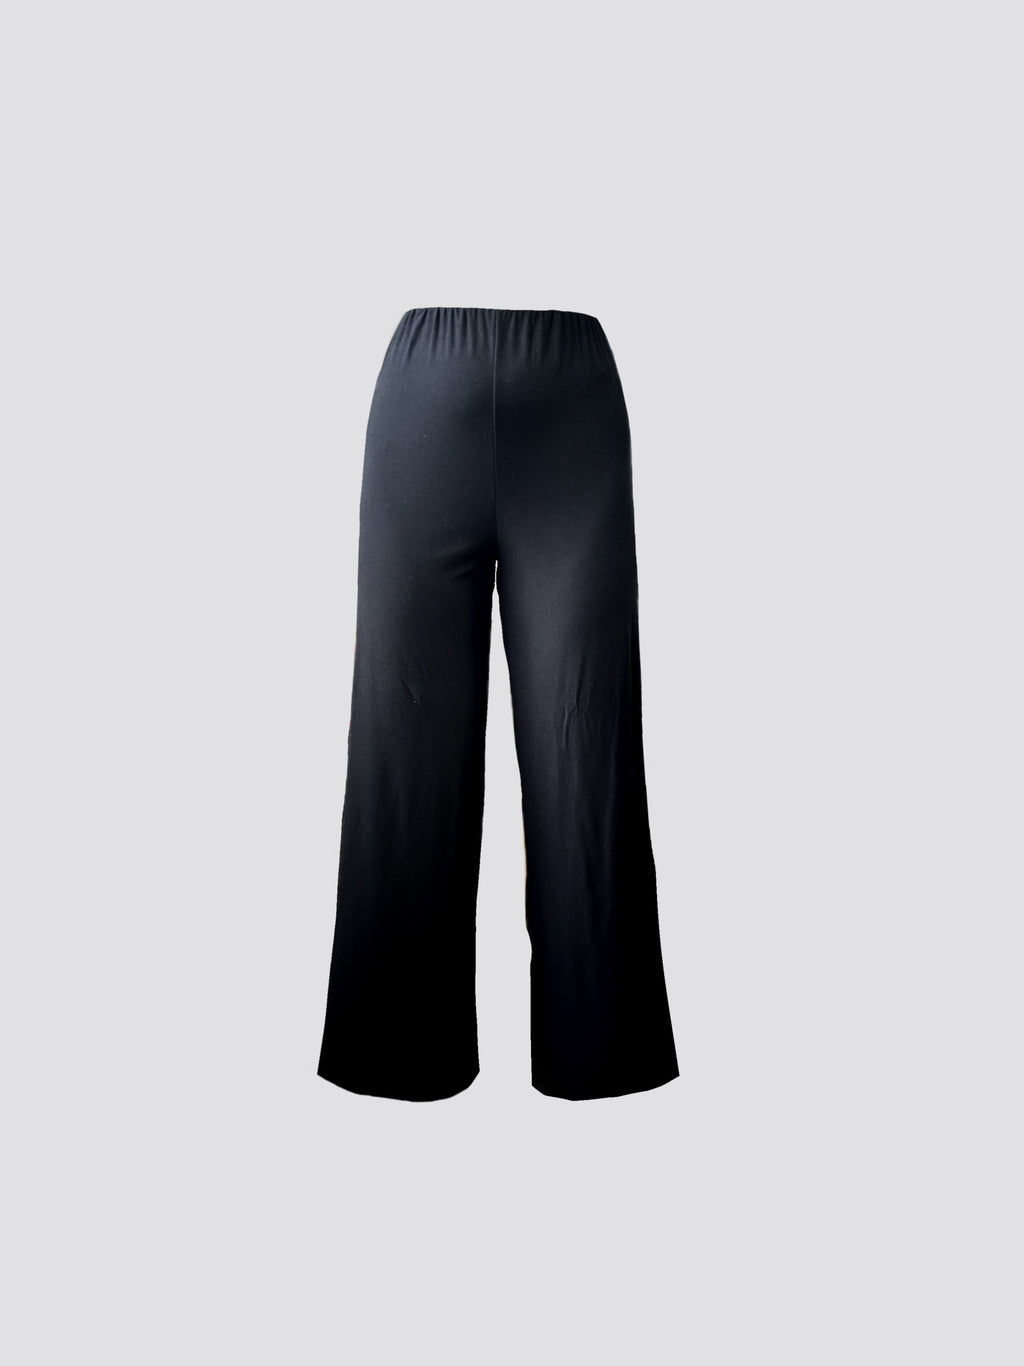 black wide leg trouser in supersoft